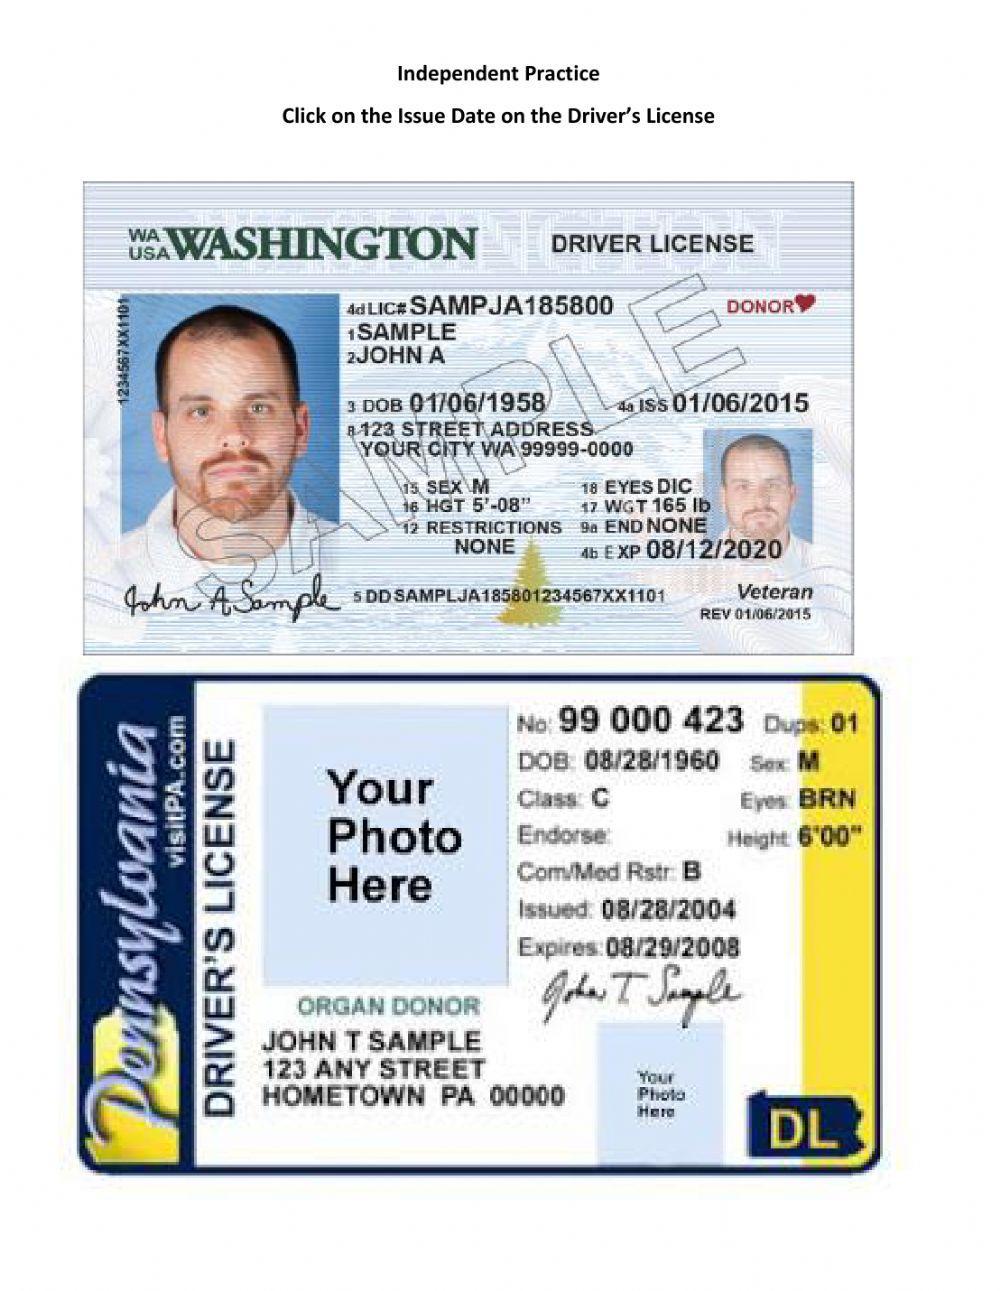 Finding Issue date on Driver's License